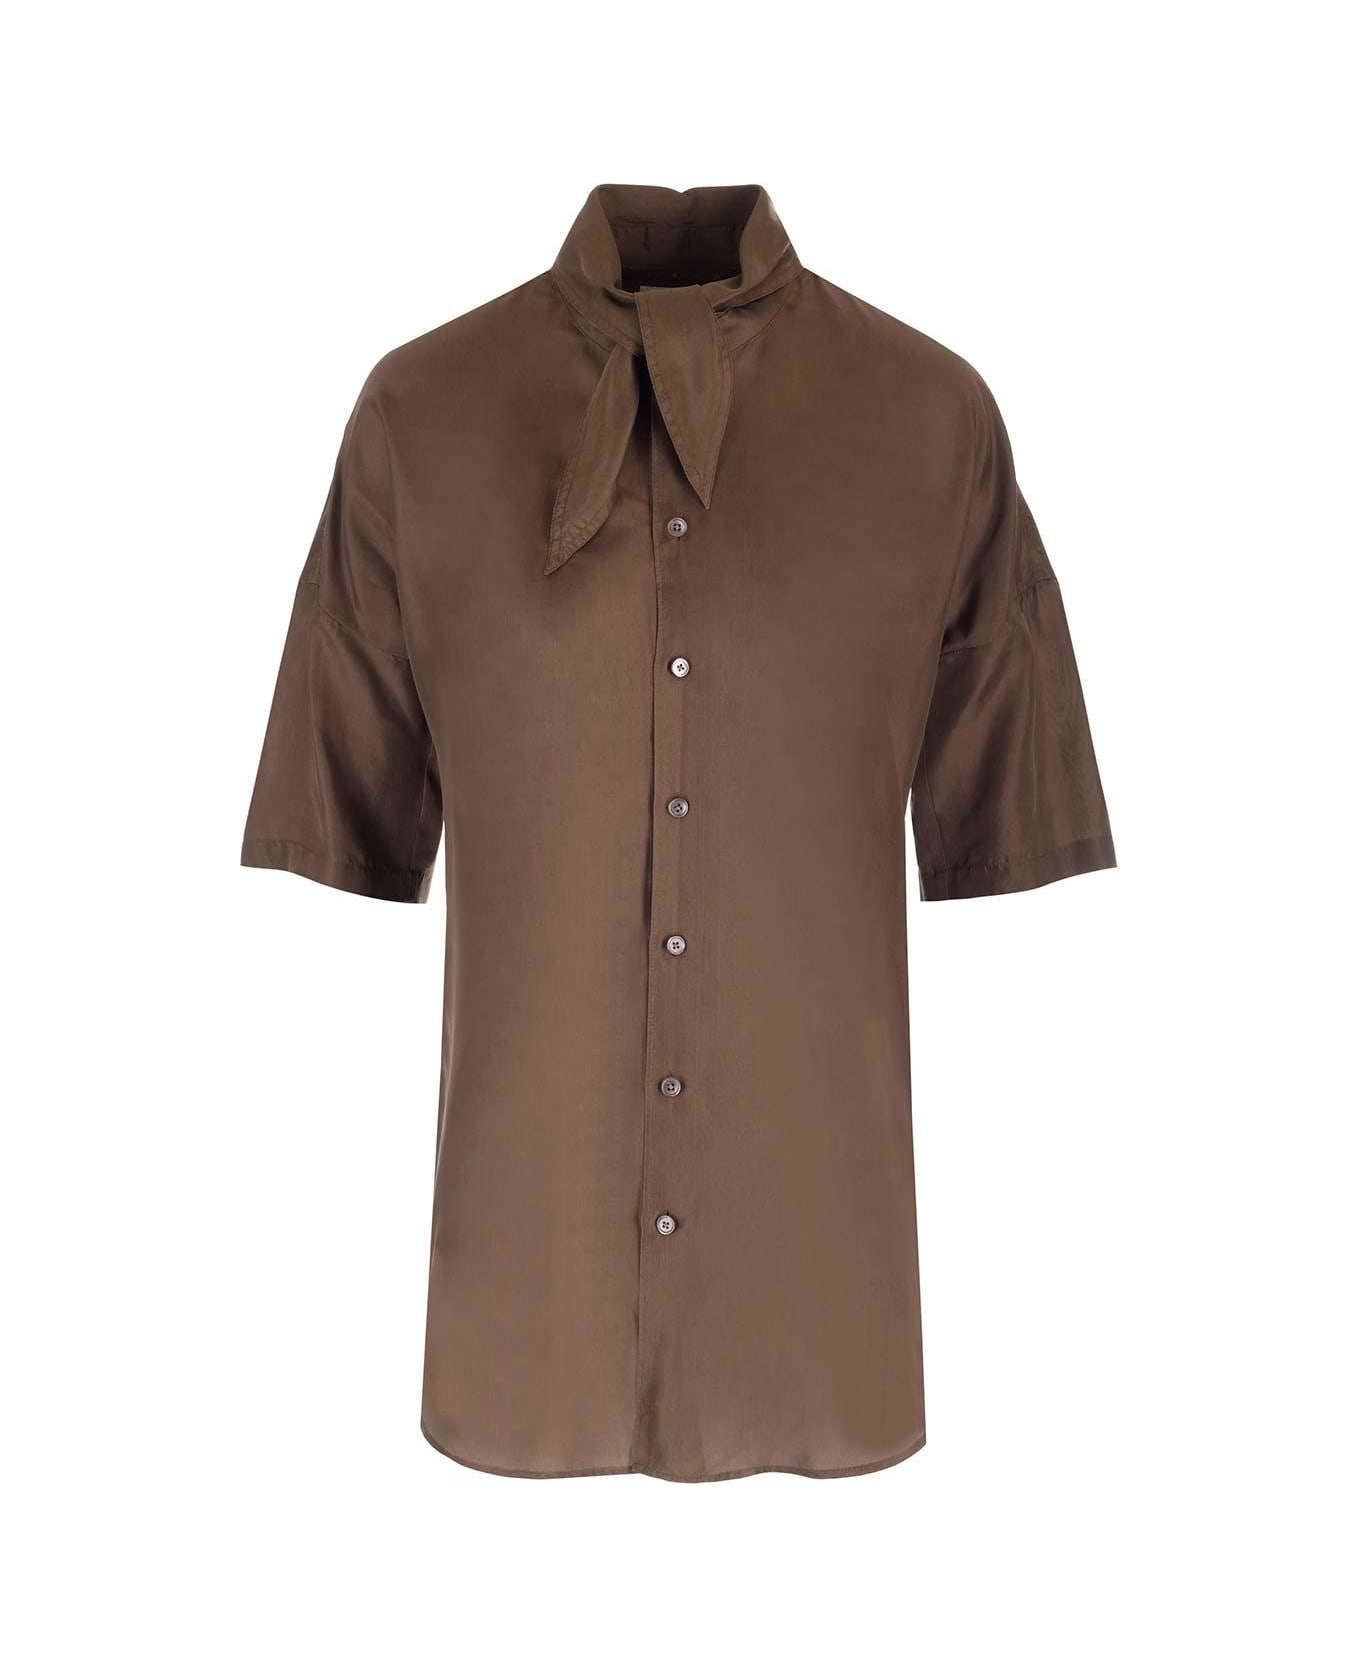 Lemaire Pussy-bow Short-sleeved Top - BR501 DARK TOBACCO